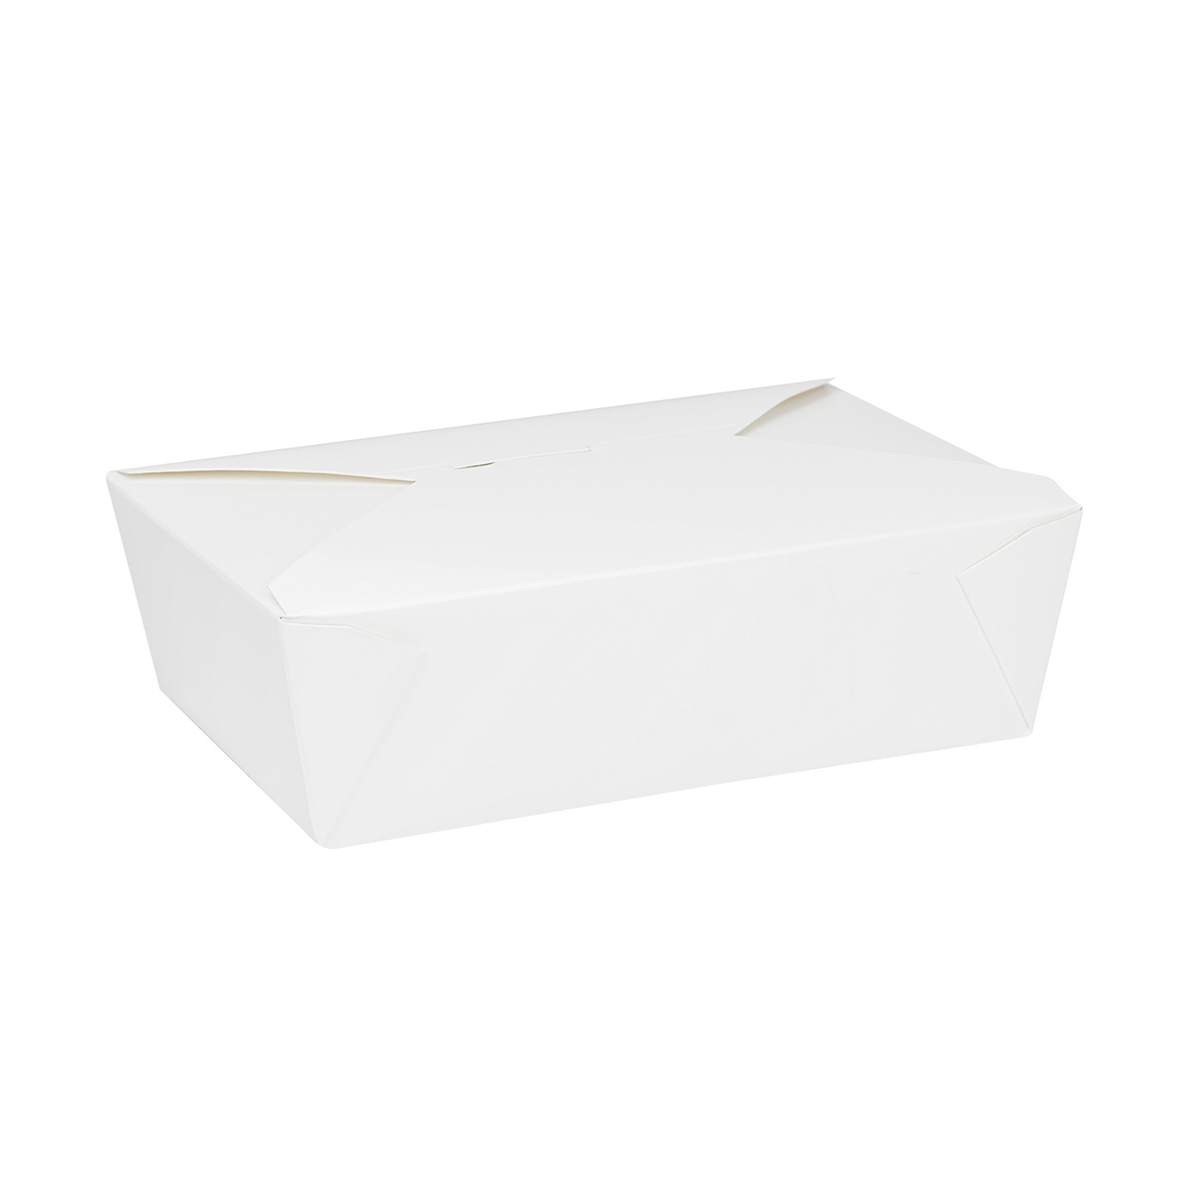 https://www.restaurantsupplydrops.shop/wp-content/uploads/1689/34/get-white-microwavable-folded-paper-3-take-out-container-karat-large-fold-to-go-box-76oz-7-8-x-5-5-x-2-4-200-count-karat-for-less-and-get-the-look-you-would-like_0.png